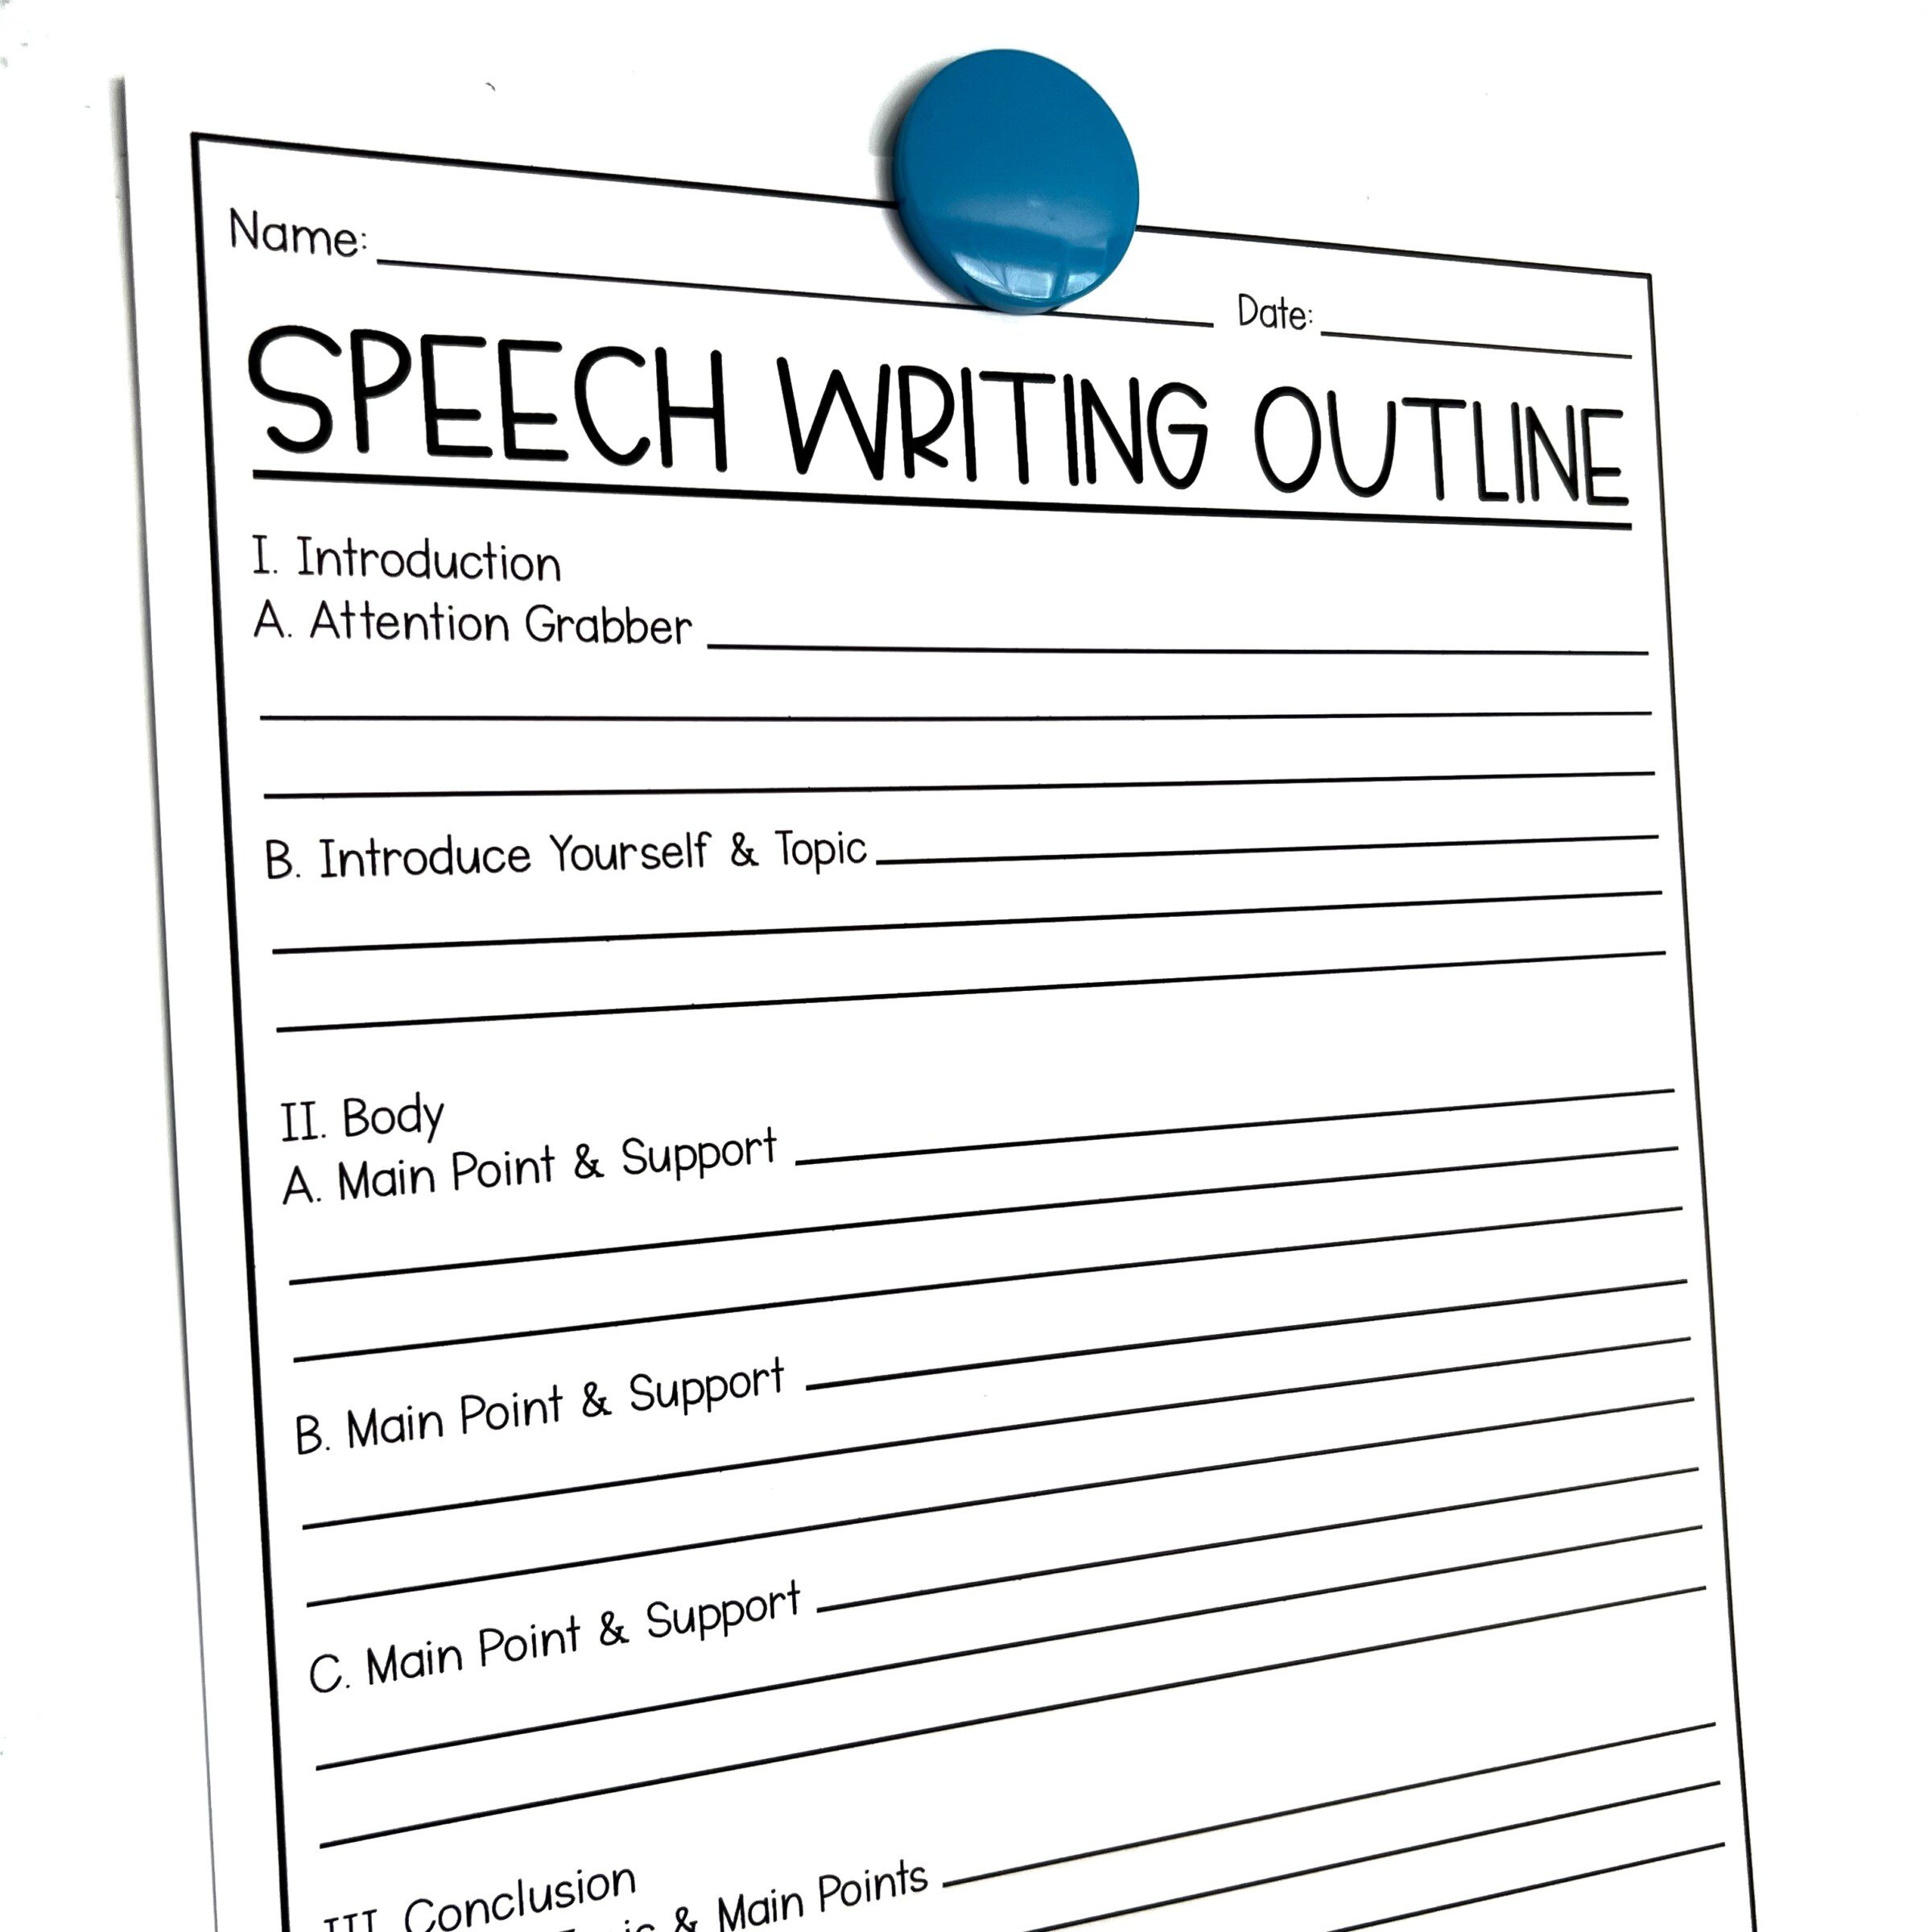 outline in speech writing example